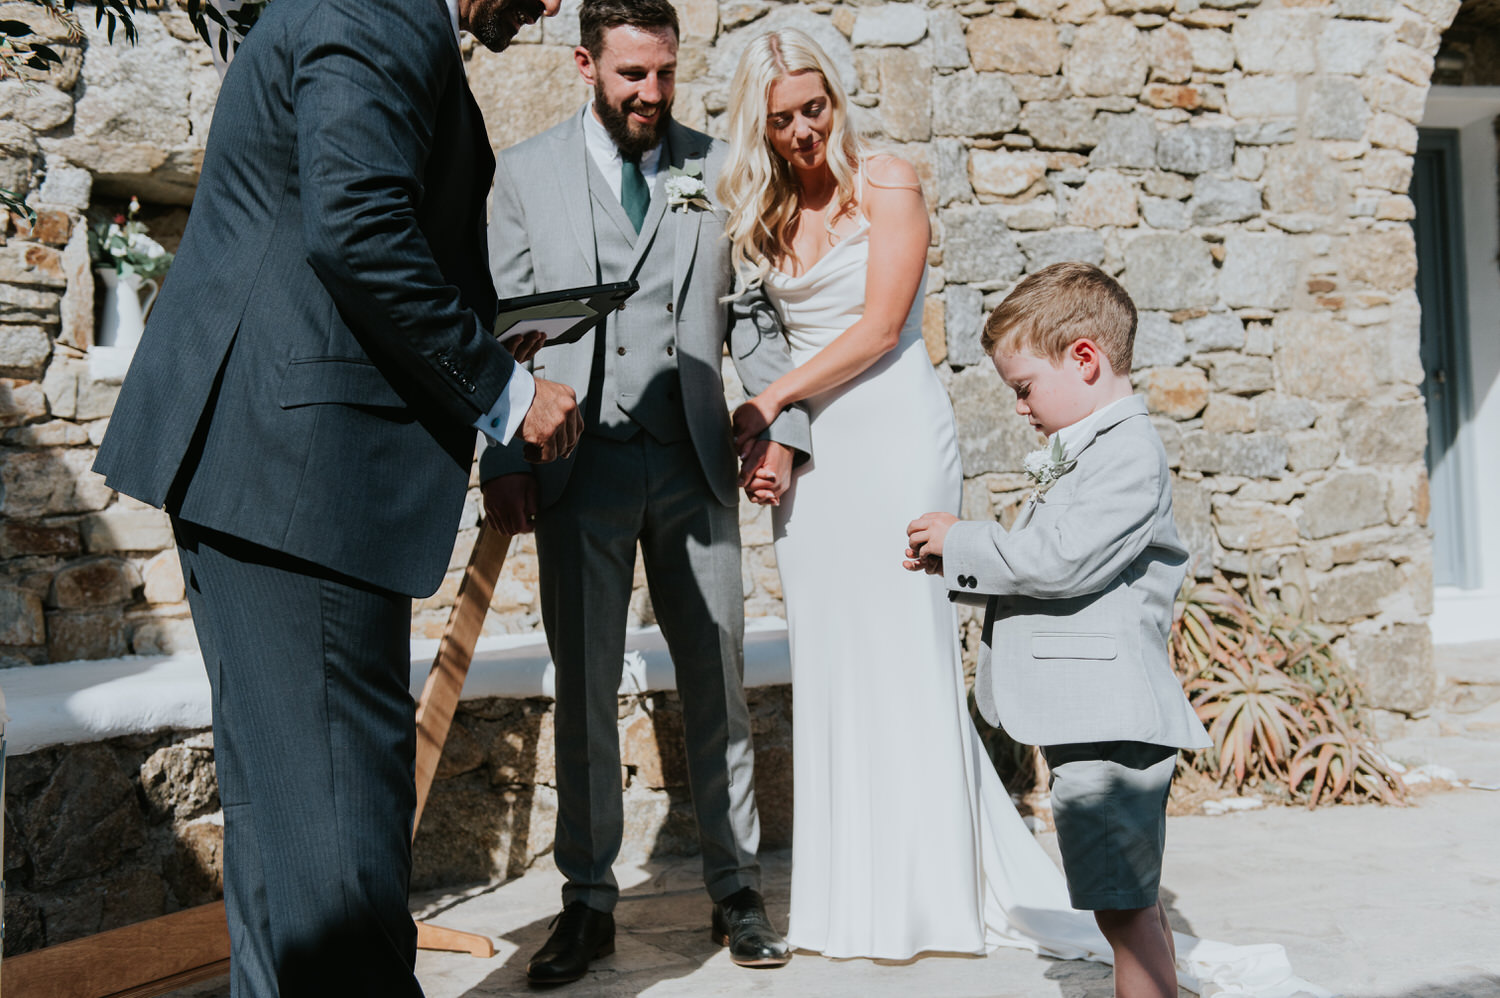 Mykonos wedding photographer: celebrant taking rings from the little ring bearer as bride and groom smile looking at him.